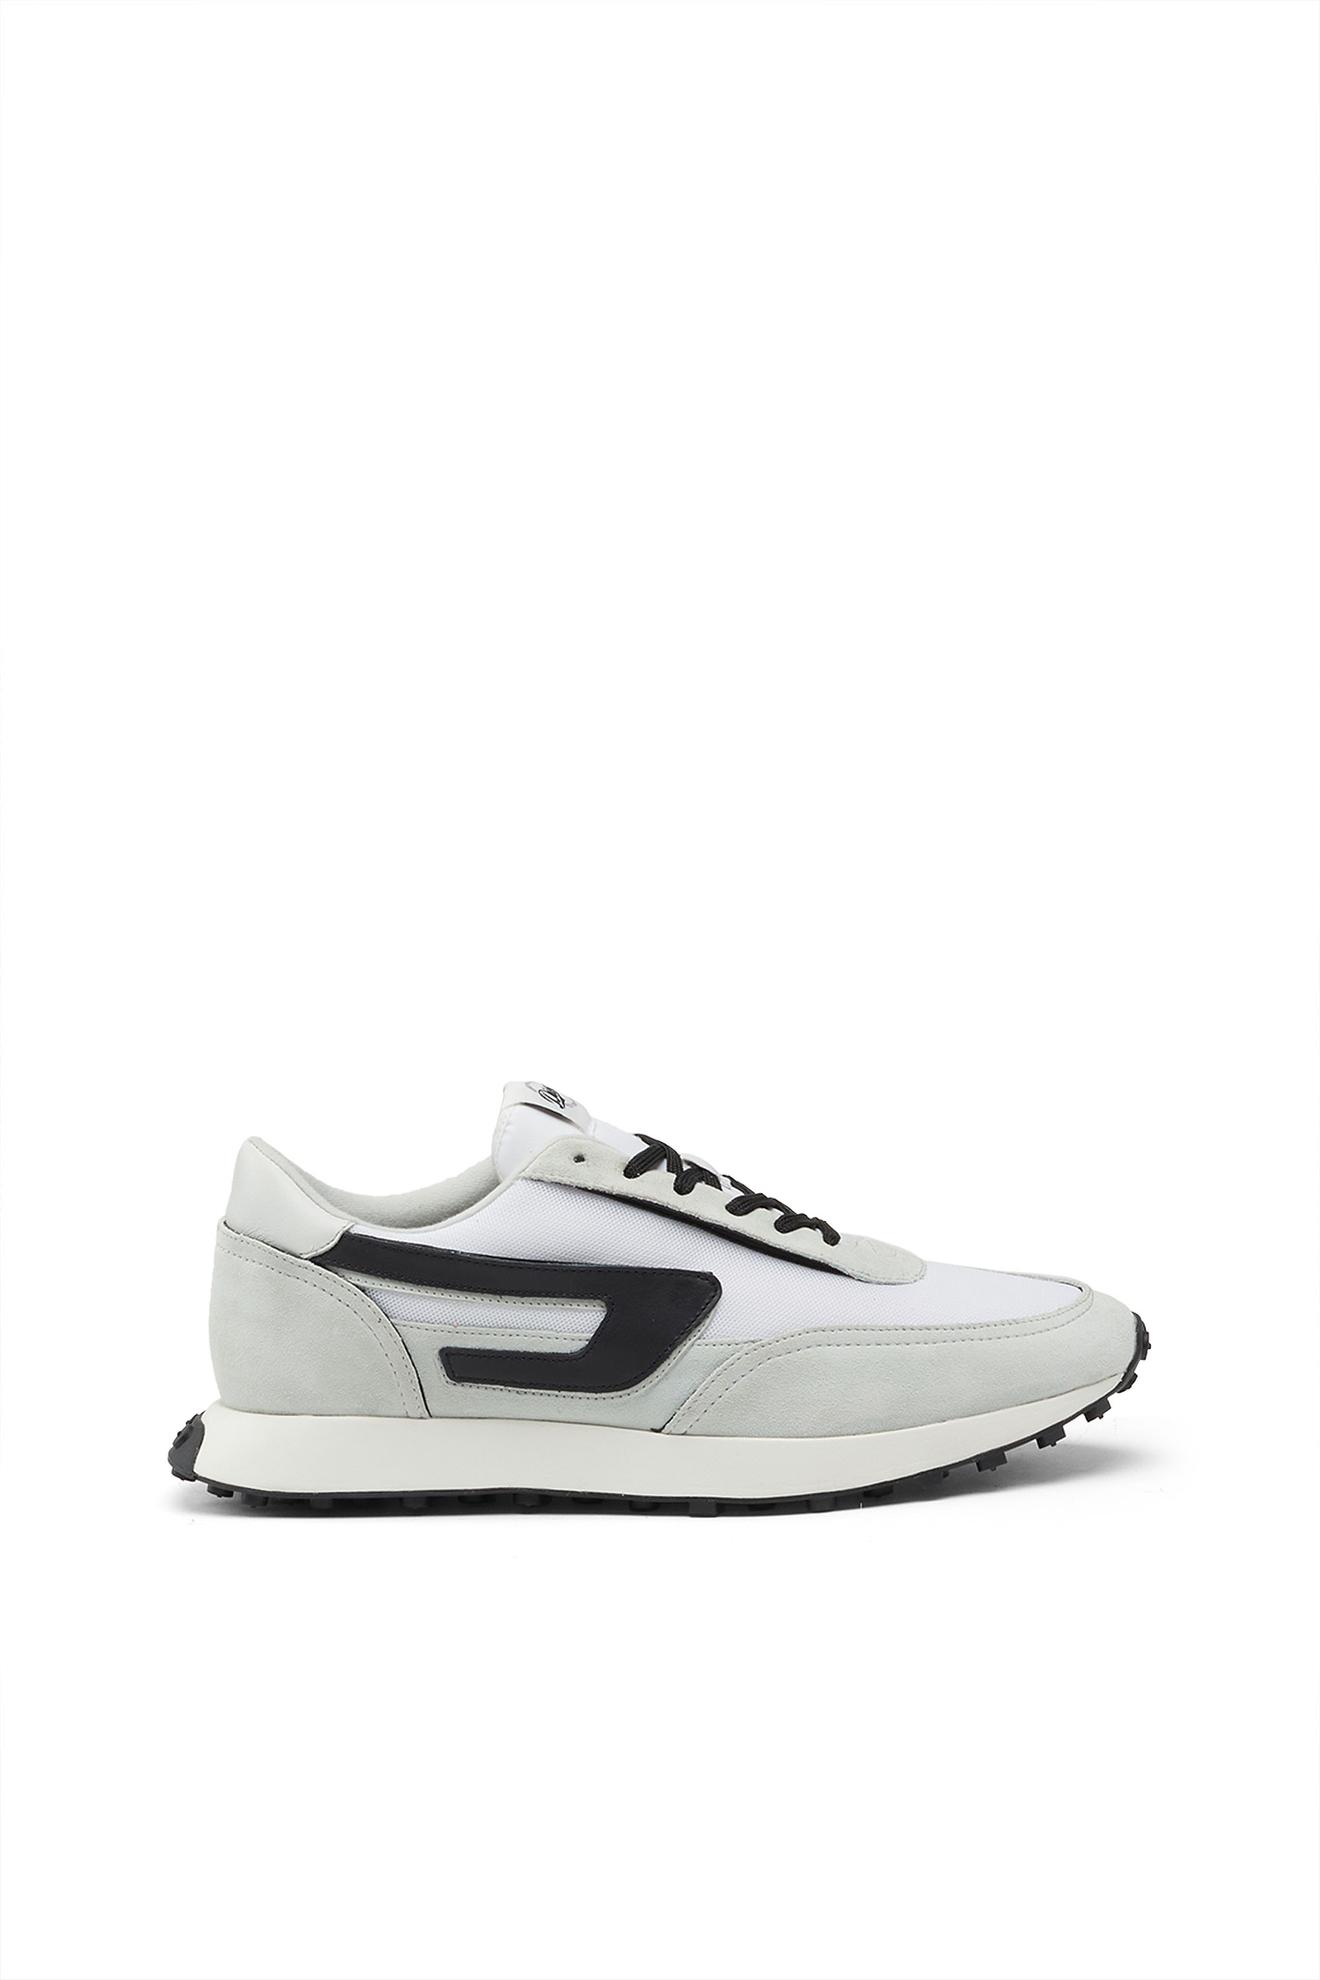 S-Racer Lc - Mesh sneakers with D logo za 79 zł w Diesel